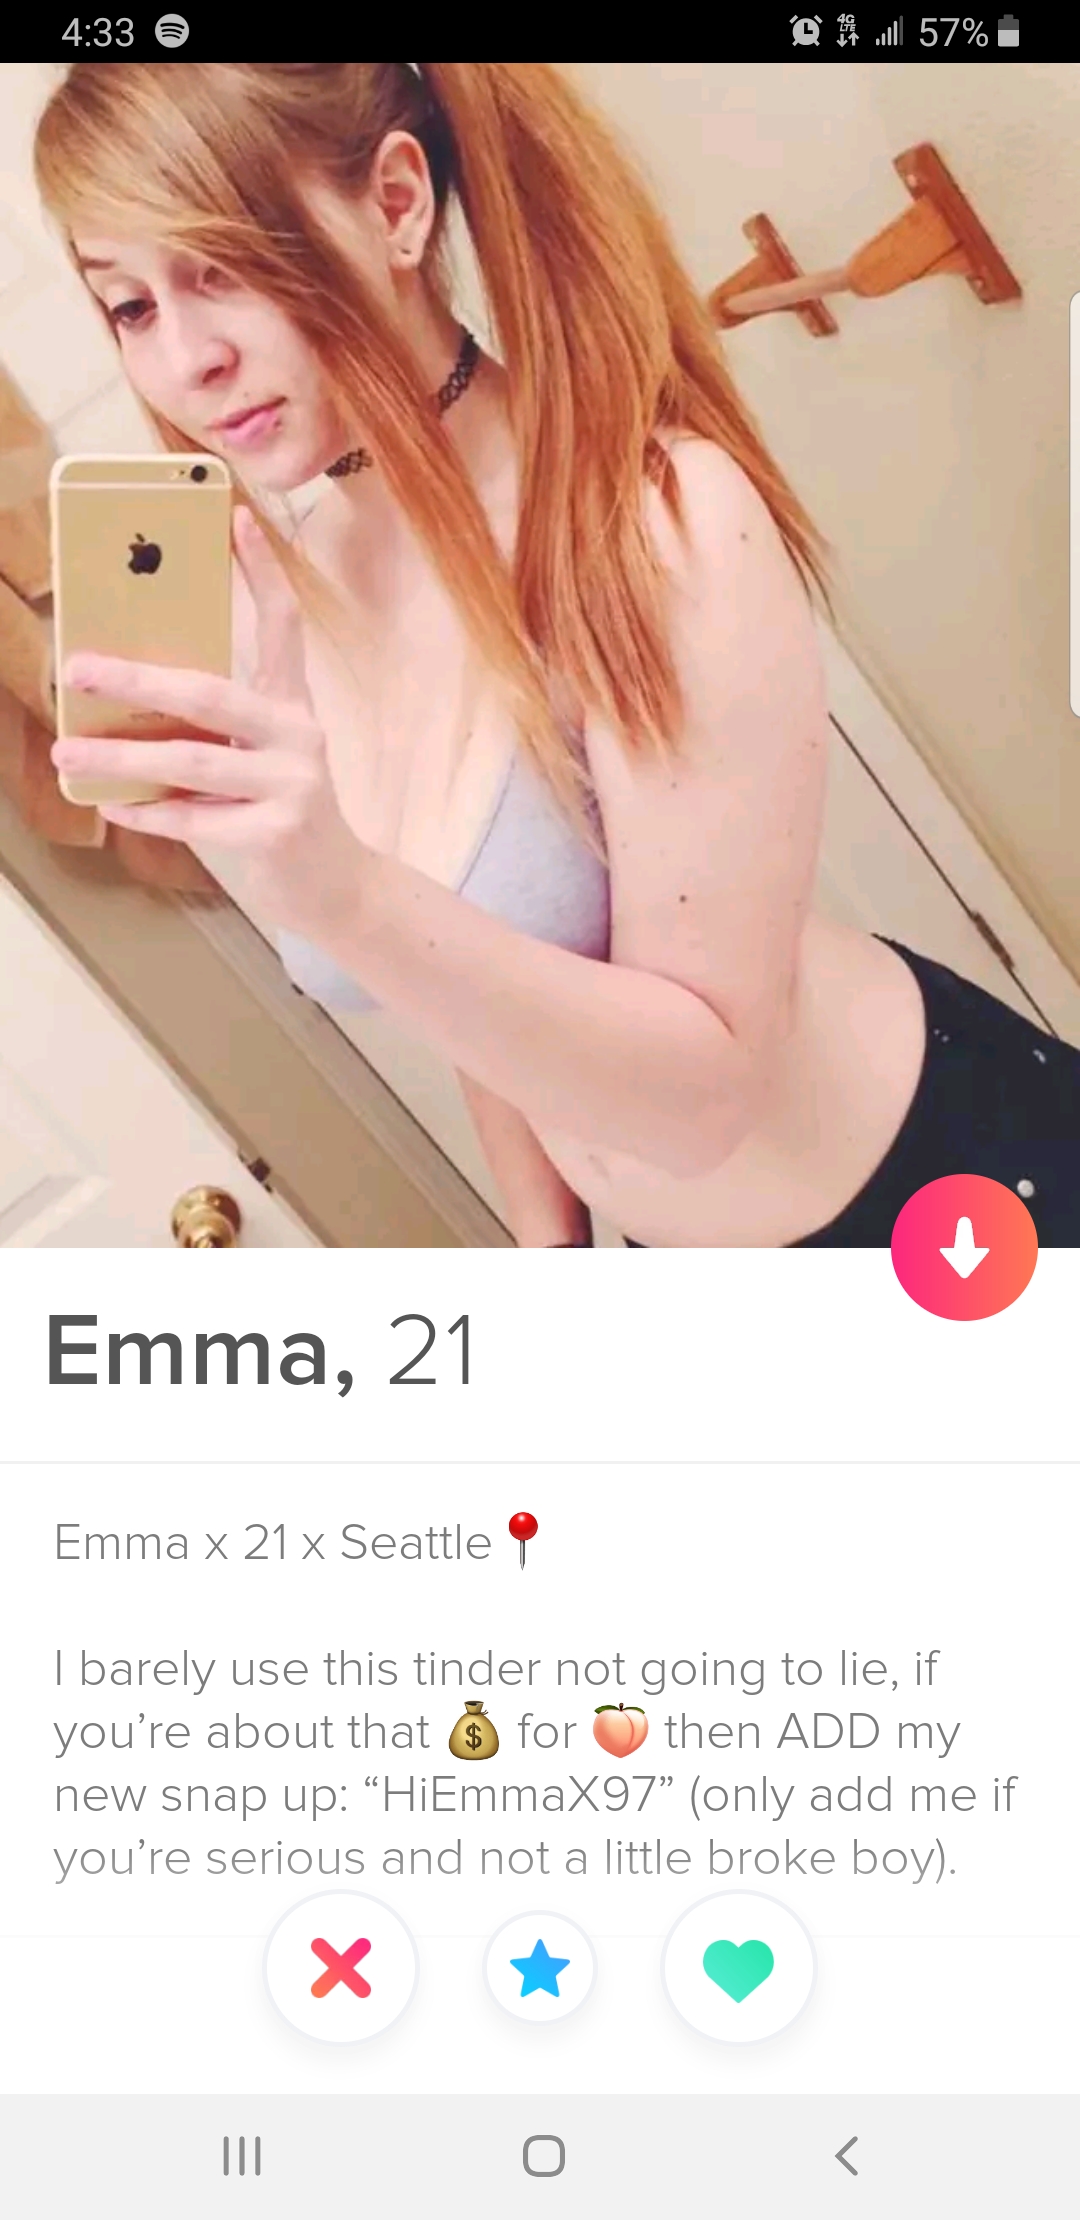 tinder wins and fails -Emma, 21 Emma x 21 x Seattle barely use this tinder not going to lie, if youre about that for then Add my new snap up